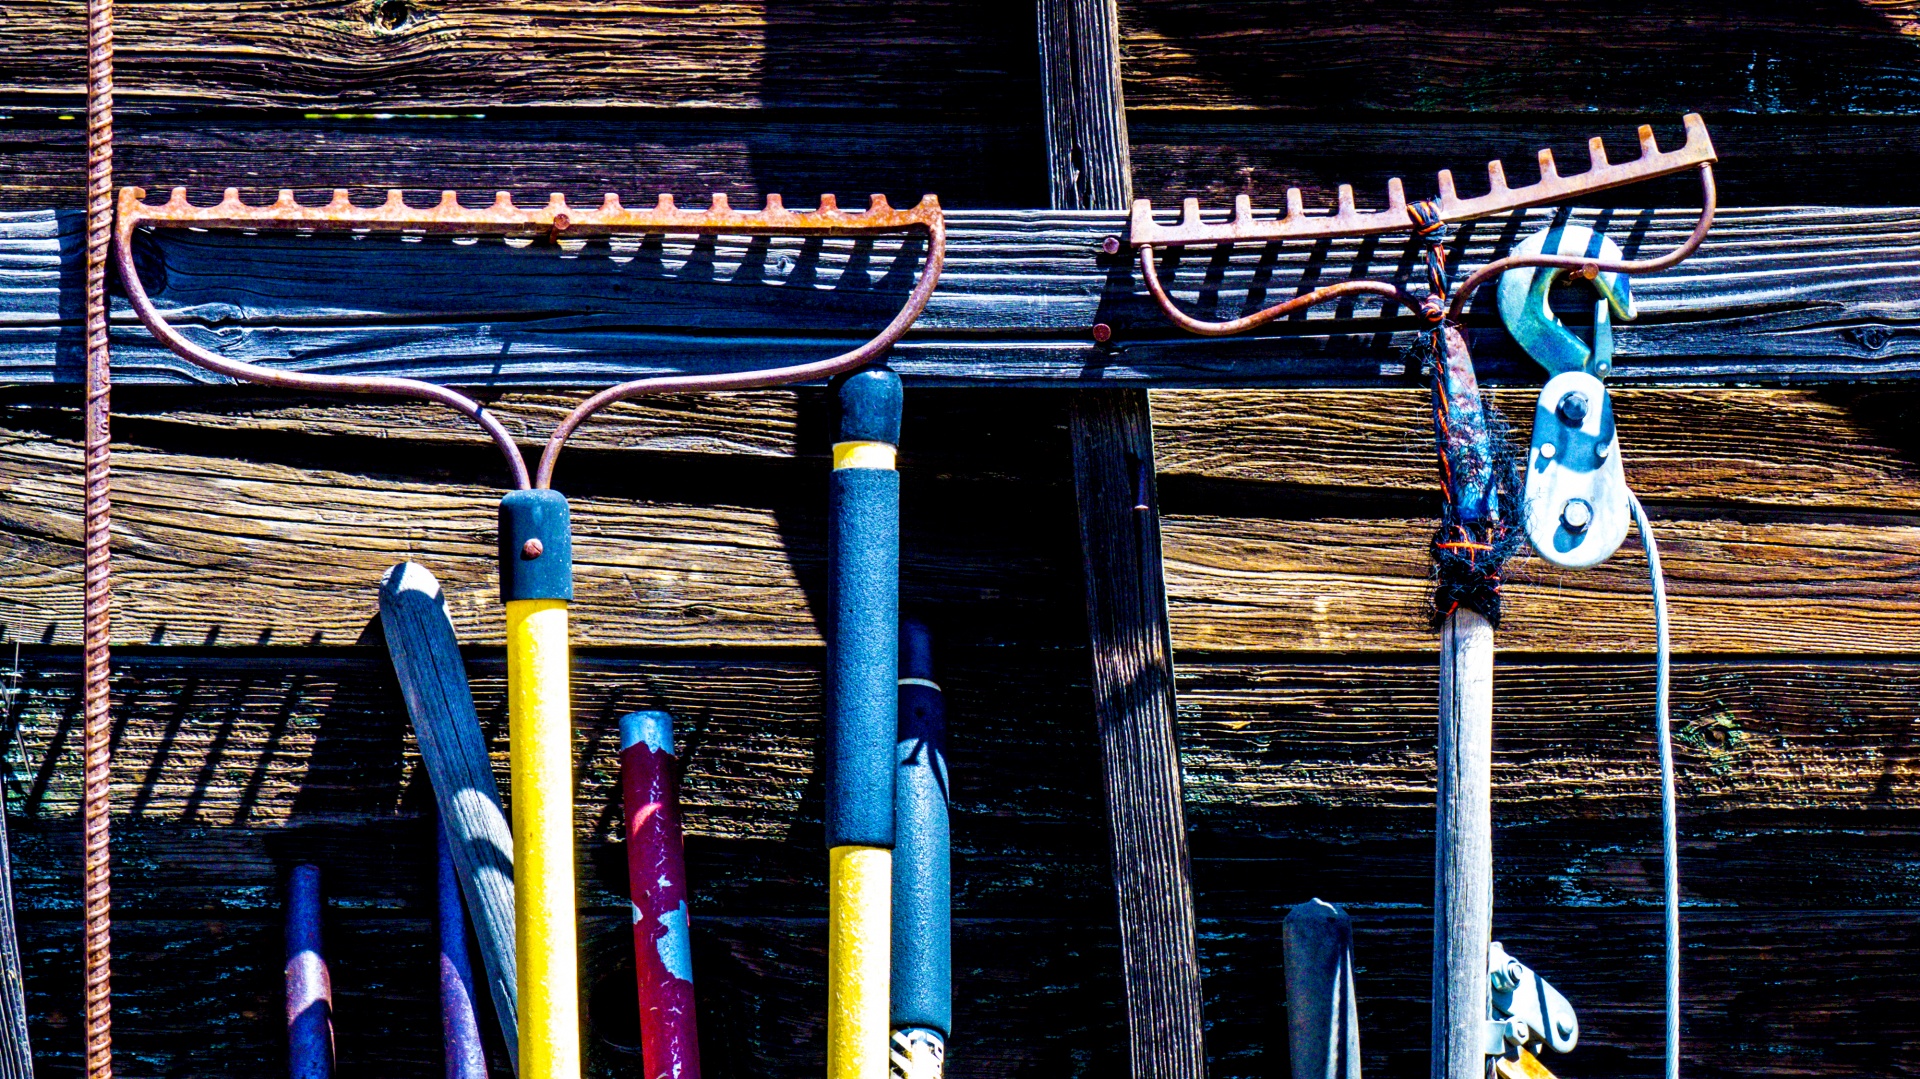 Rusty garden tools hanging on a shed